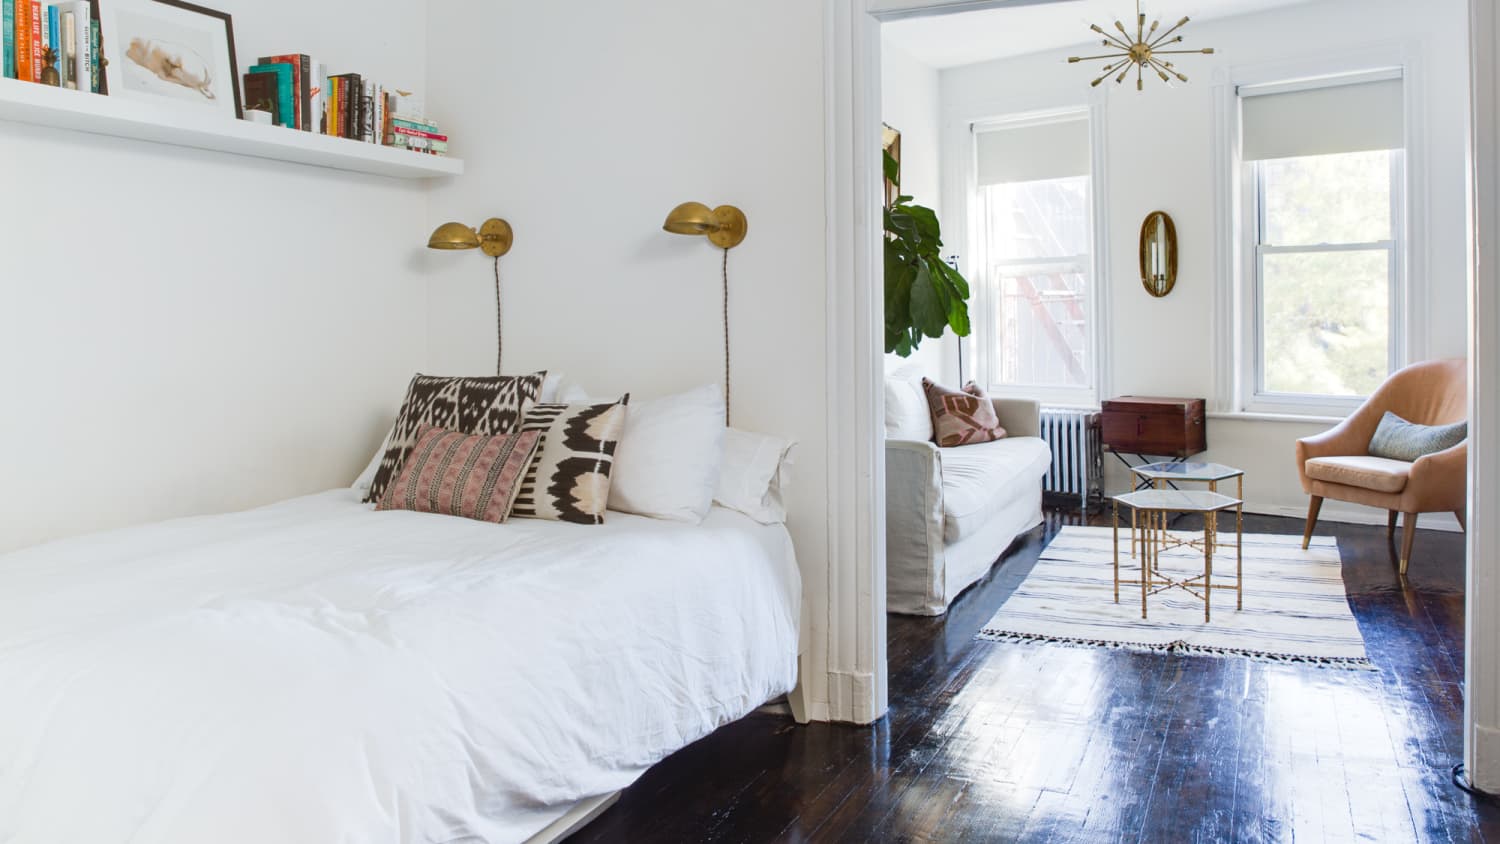 13 Apartment Storage Spaces to Consider Before You Rent - The